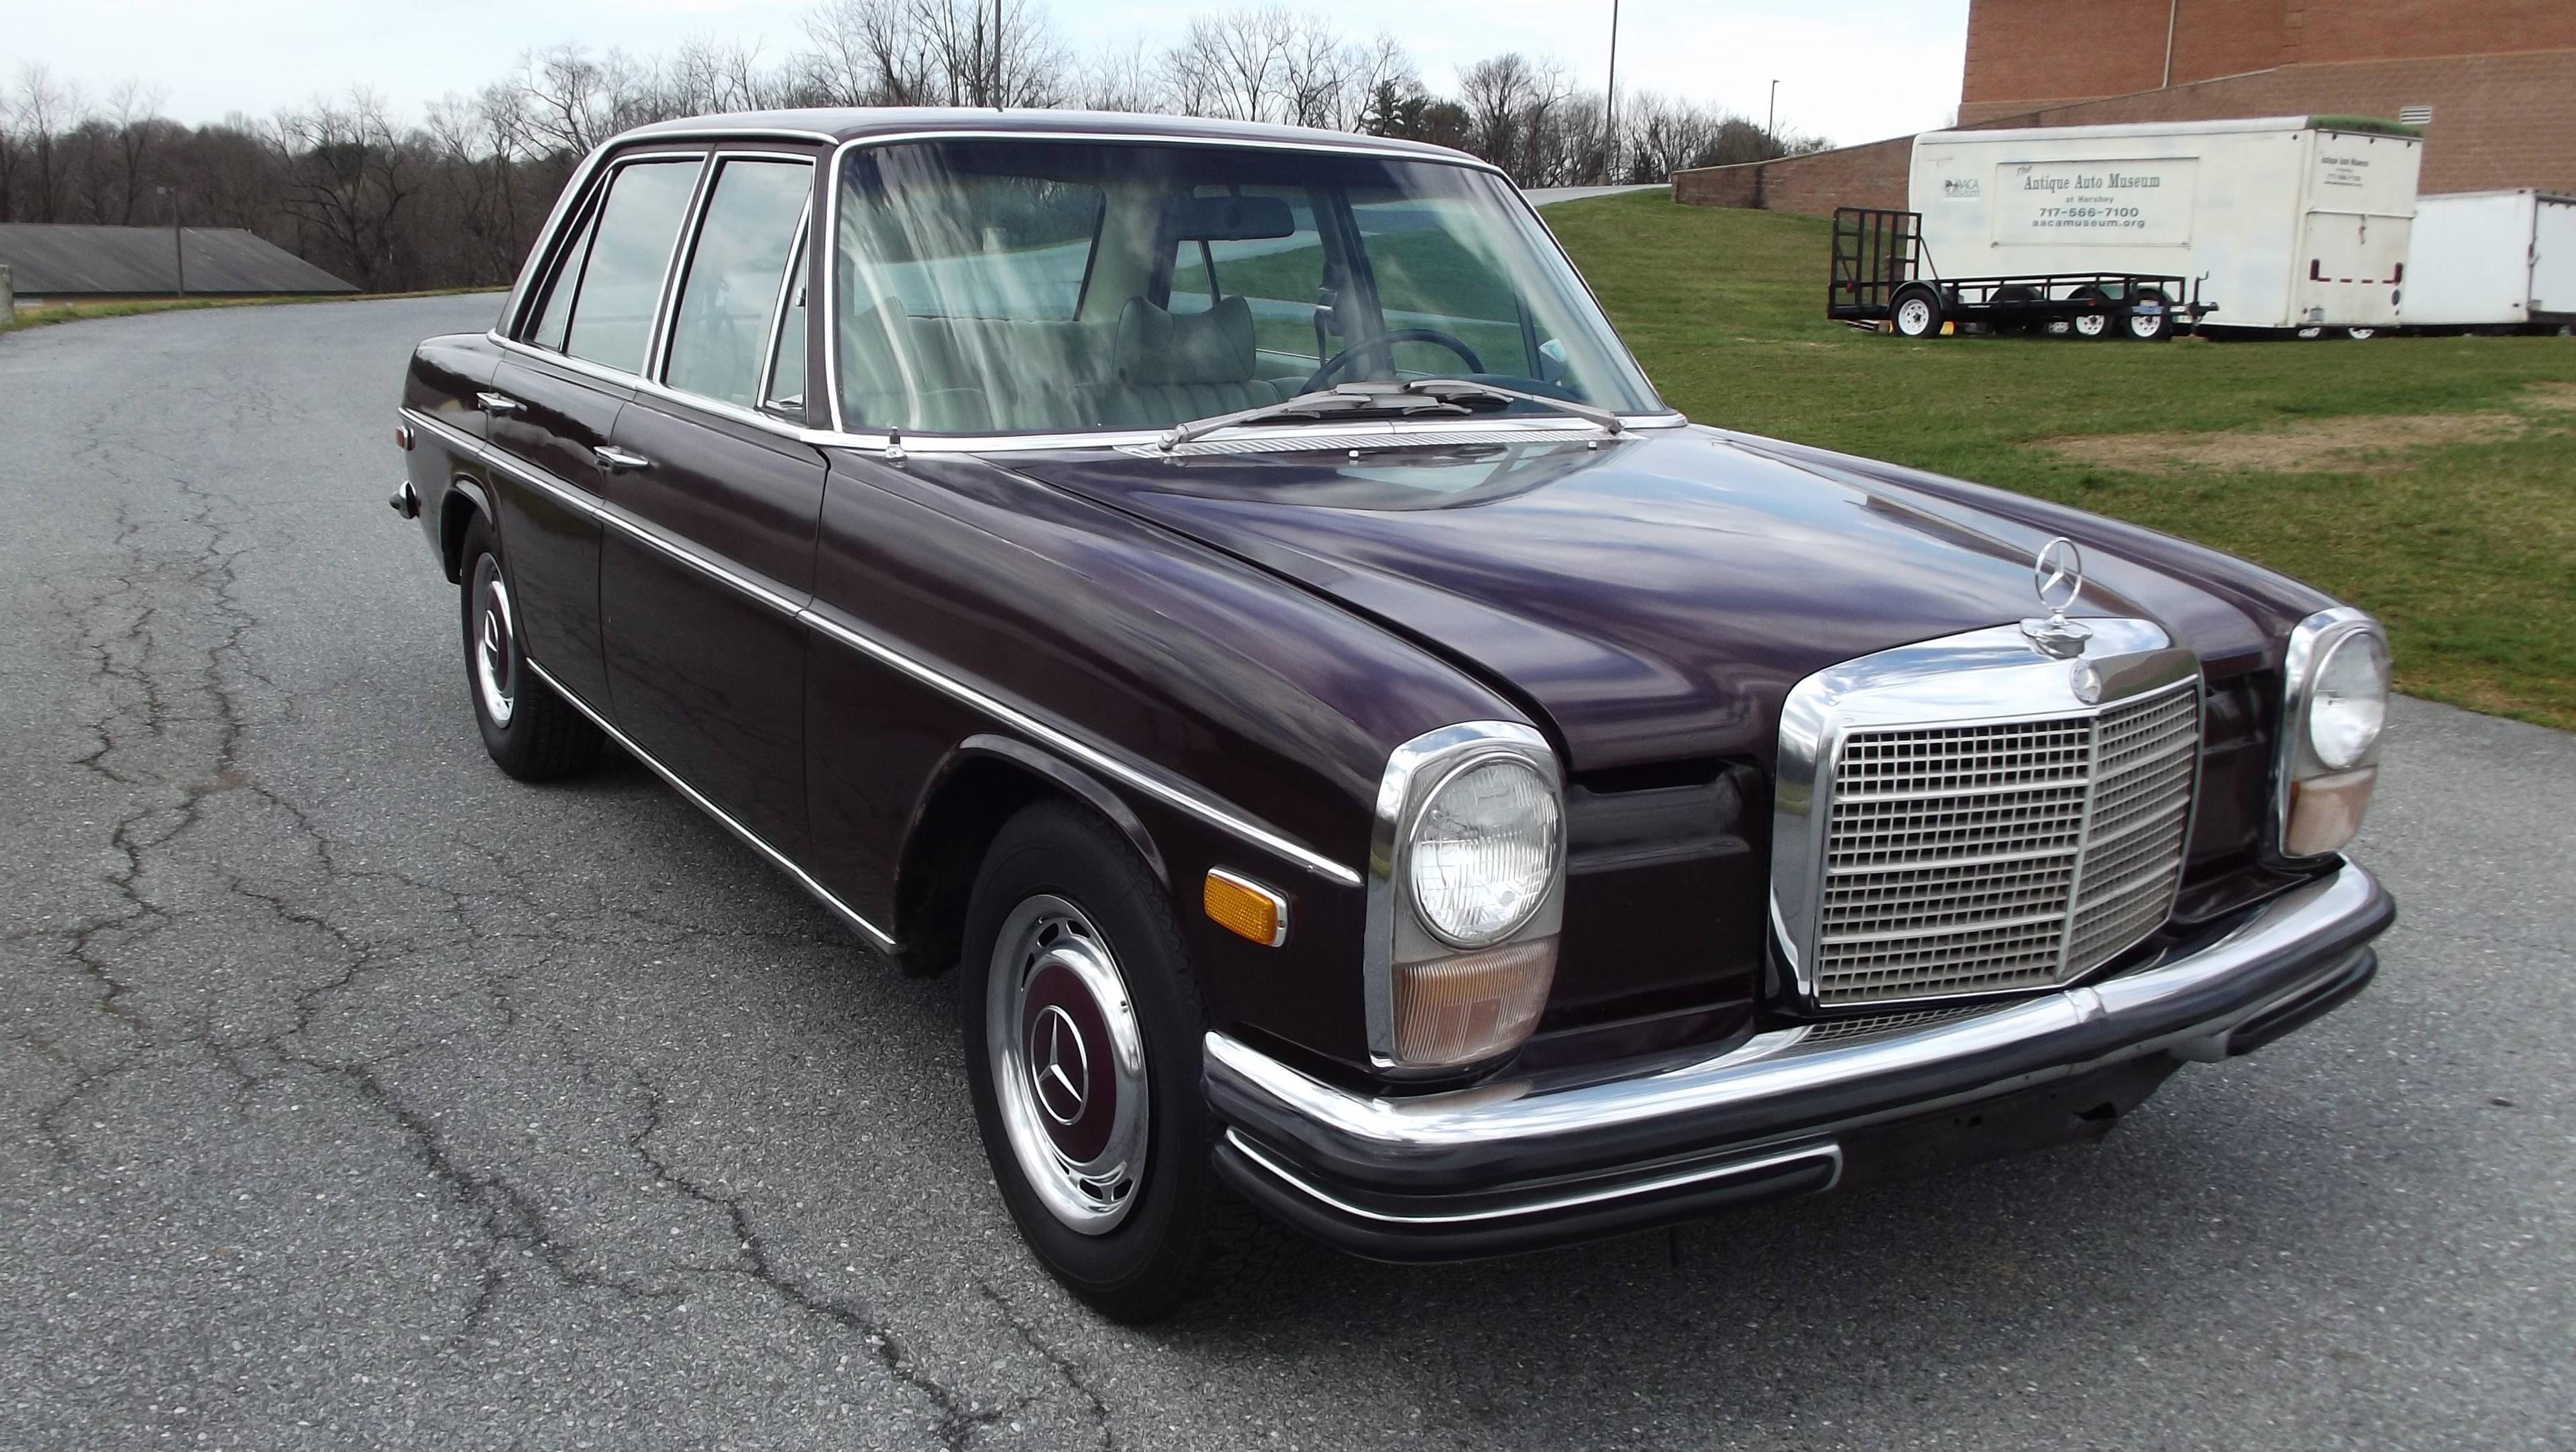 1970 Mercedes-Benz 250 Sedan.Runs and drives.Has been sitting for a while a